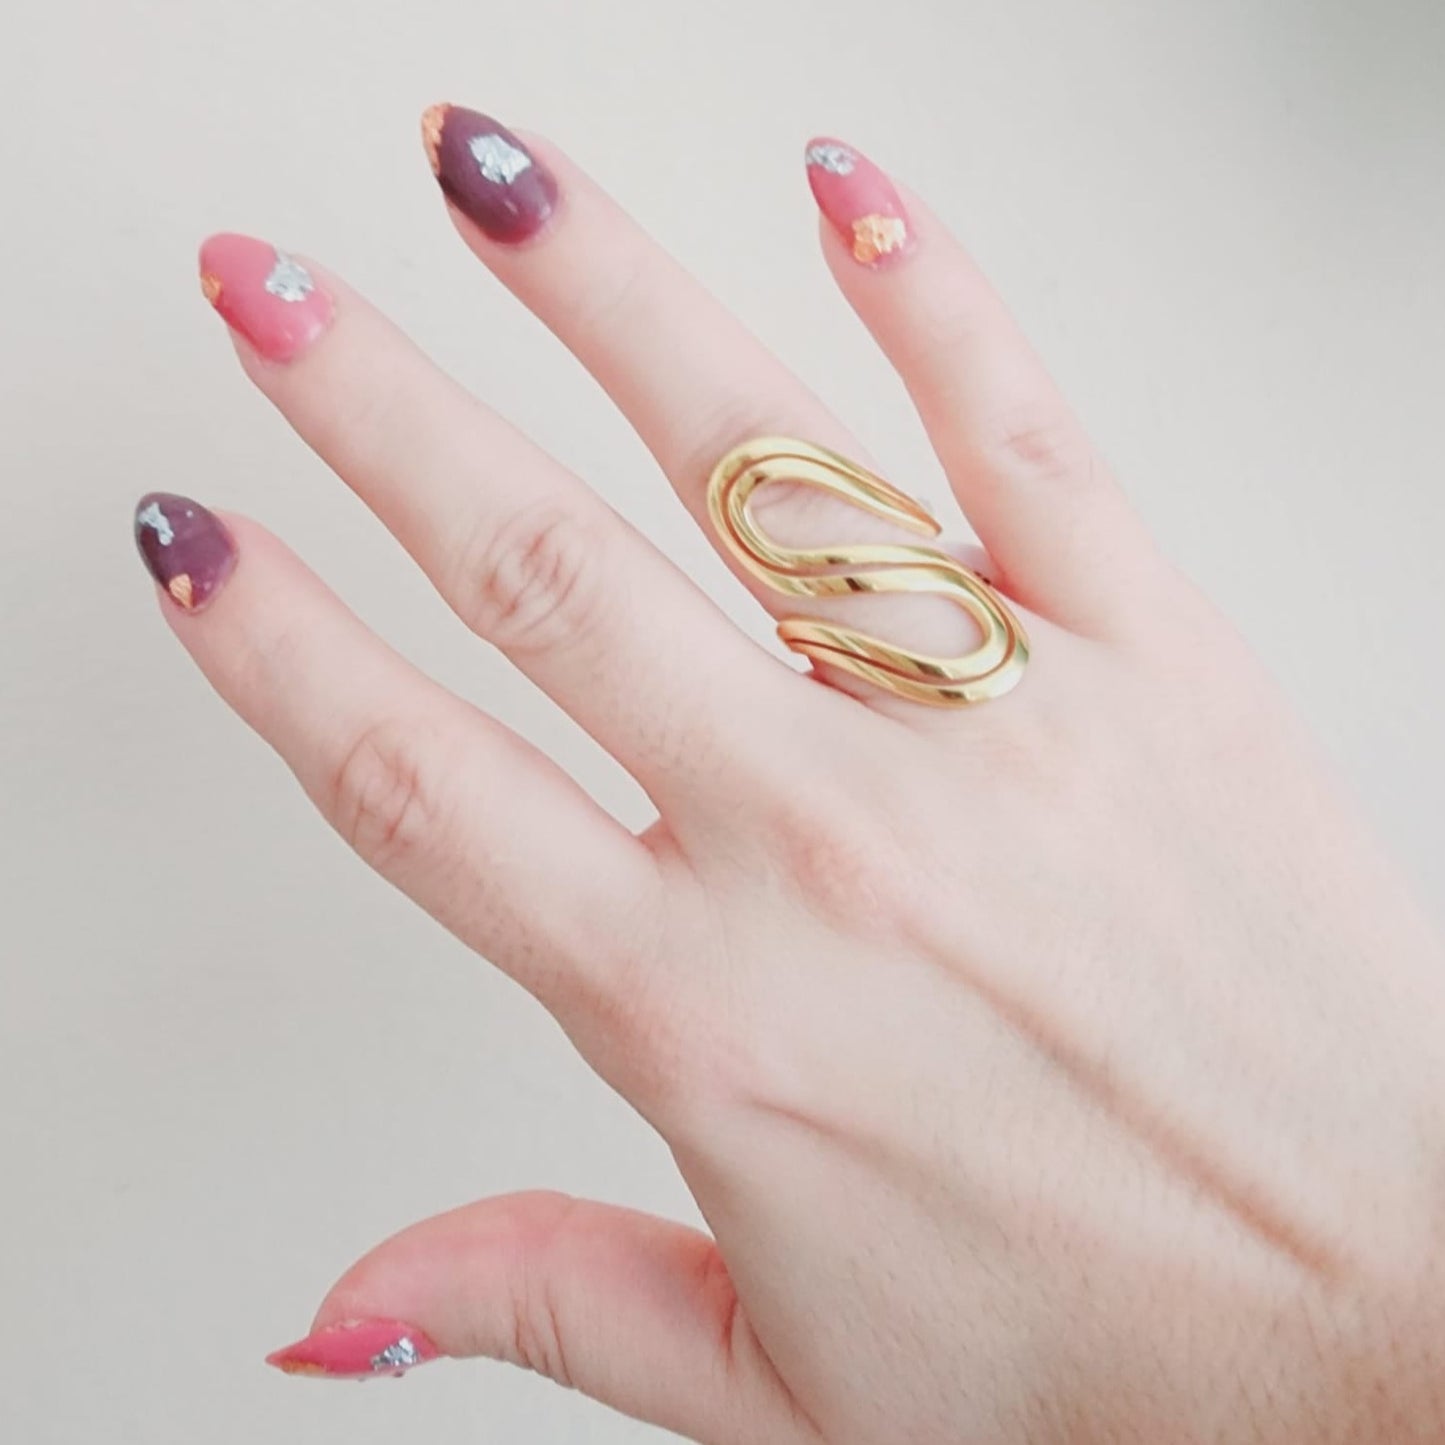 Geometric Bold ring, Water Resistant classy rings, Water Resistant simple rings, sweat resistant jewelry, water resistant minimalist jewelry, minimalist rings, waterproof rings, stainless steel rings, 14k gold plated simple rings, 14k gold plated classy rings, gold vintage rings, tarnish free rings, stackable rings, gold stackable rings, tarnish free jewelry, dainty abstract rings, dainty chunky rings, Unique Stylish Ring, Statement large ring, Big Irregular Ring, Irregular Statement Ring